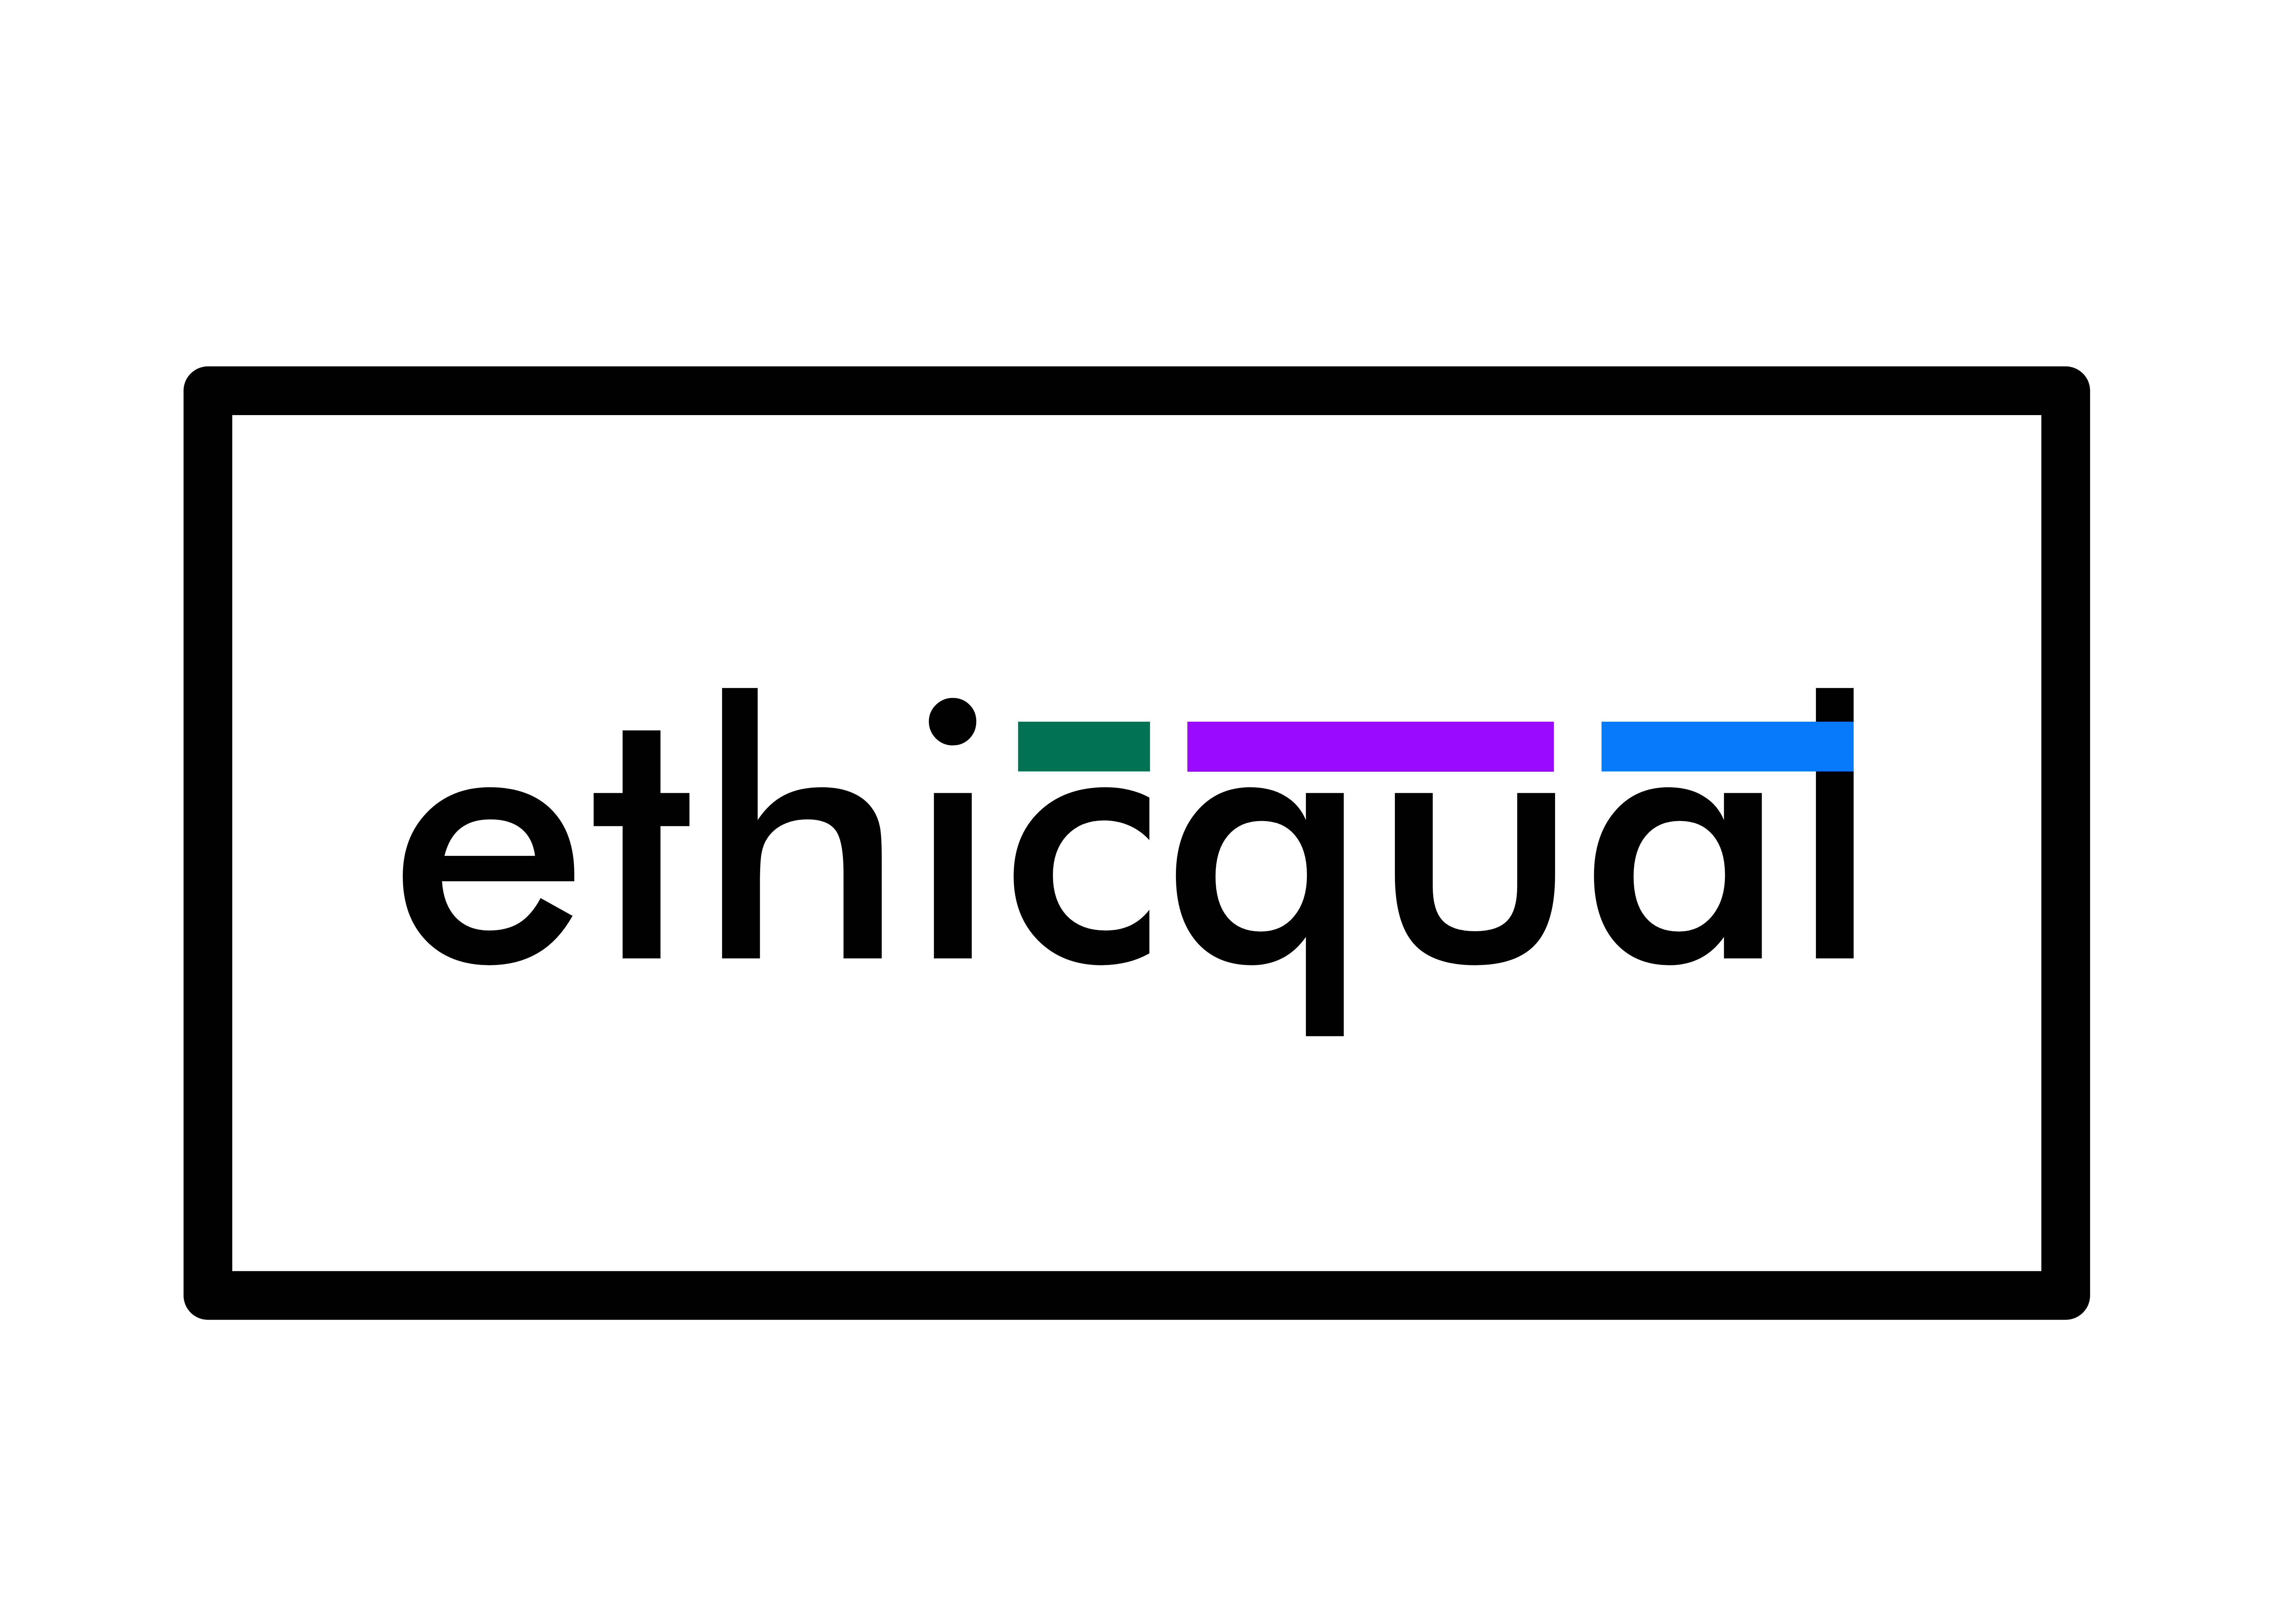 Quantum Ethics and Quantum Policy: Ethicqual provides solutions via trainings, impact assessments, scenario planning, and policy research towards responsible quantum technology